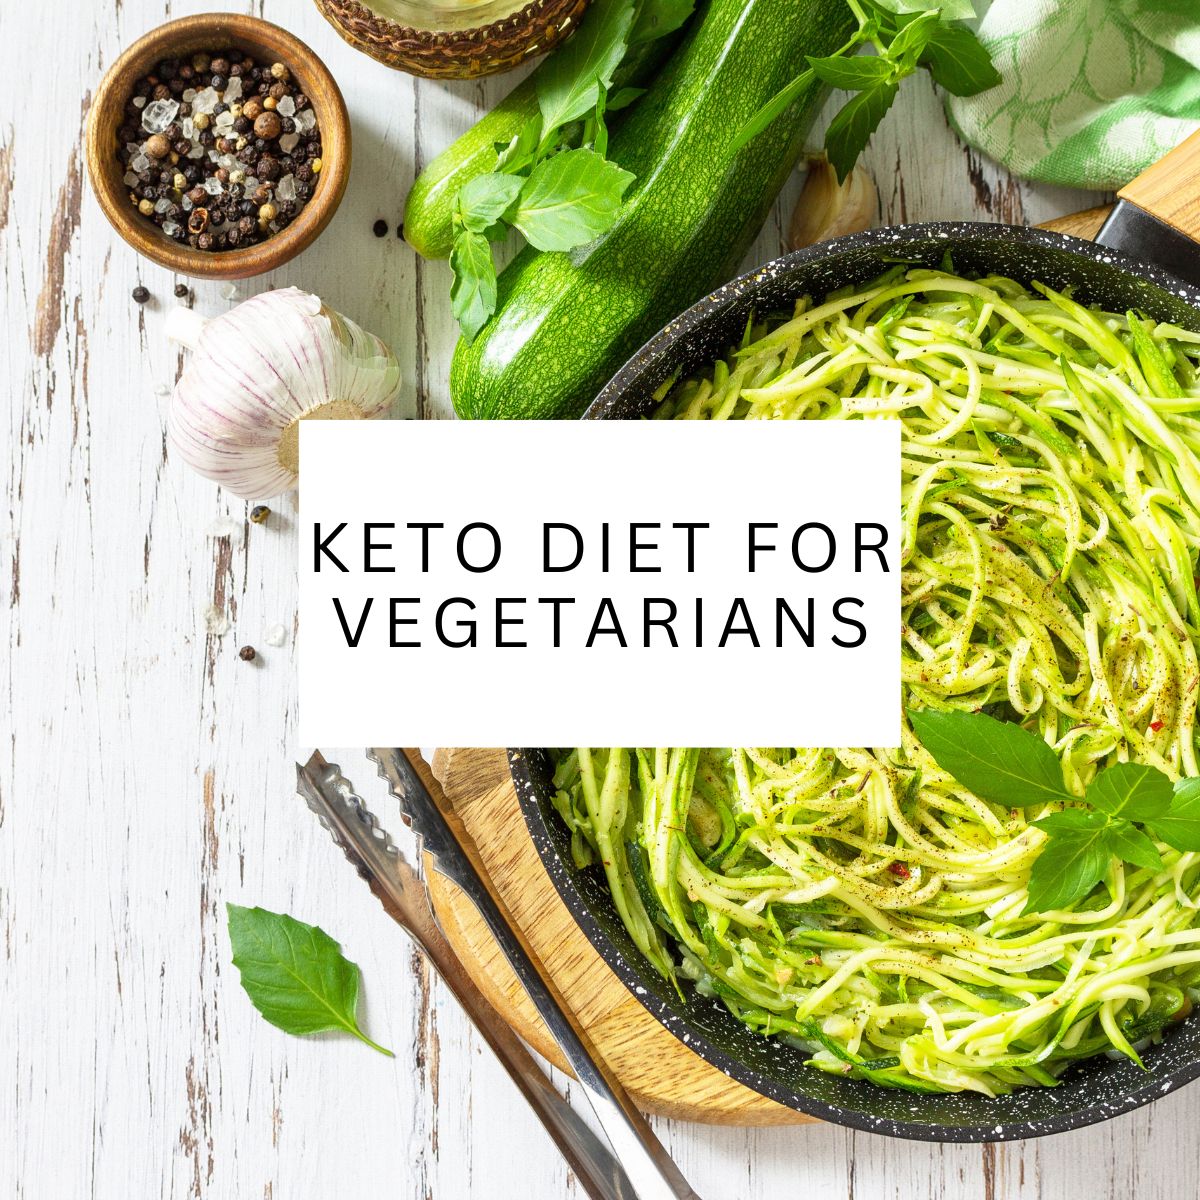 Discover the ultimate guide to the keto diet for vegetarians. Learn how to successfully follow a low-carb, high-fat vegetarian eating plan that supports weight loss and promotes overall health. With tips,